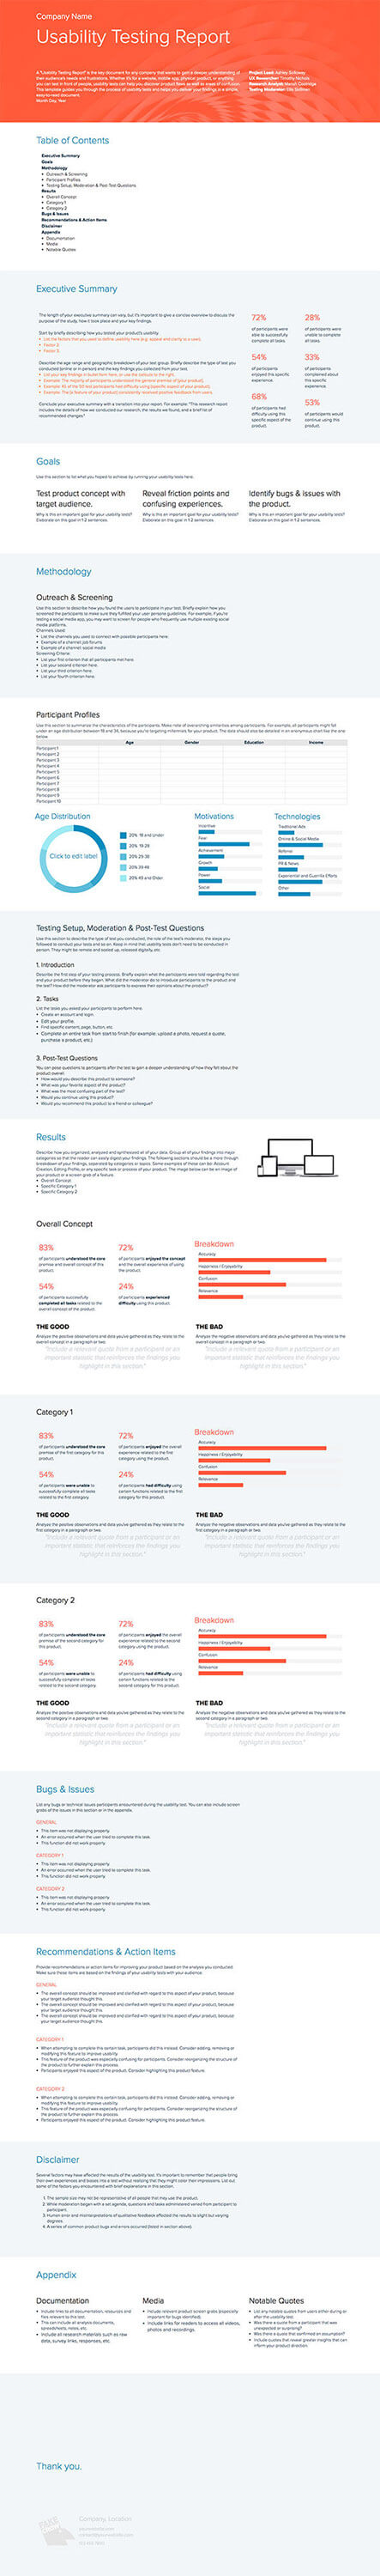 How To Write A Usability Testing Report (With Samples Throughout Usability Test Report Template